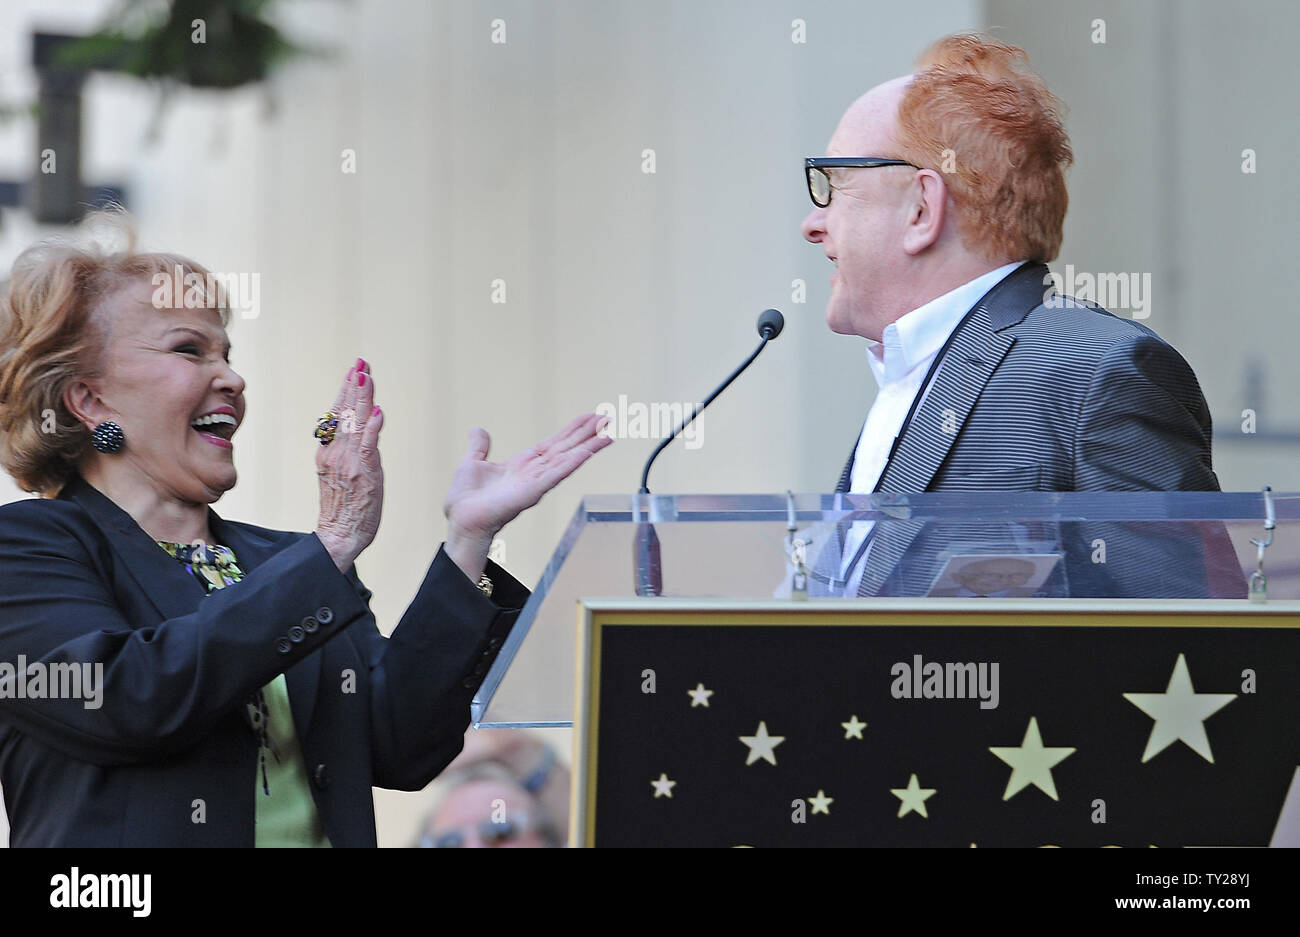 The late Buddy Holly received a posthumous star on Hollywood's Walk of Fame on his 75th birthday on Vine Street in front of The Capitol Records Building in Los Angeles on September 7, 2011. His widow, Maria Elena Holly who made a rare appearance at the event, listens as record producer Peter Asher puts on 'Buddy Holly' style glasses and says a few words.   UPI/Jayne Kamin-Oncea Stock Photo